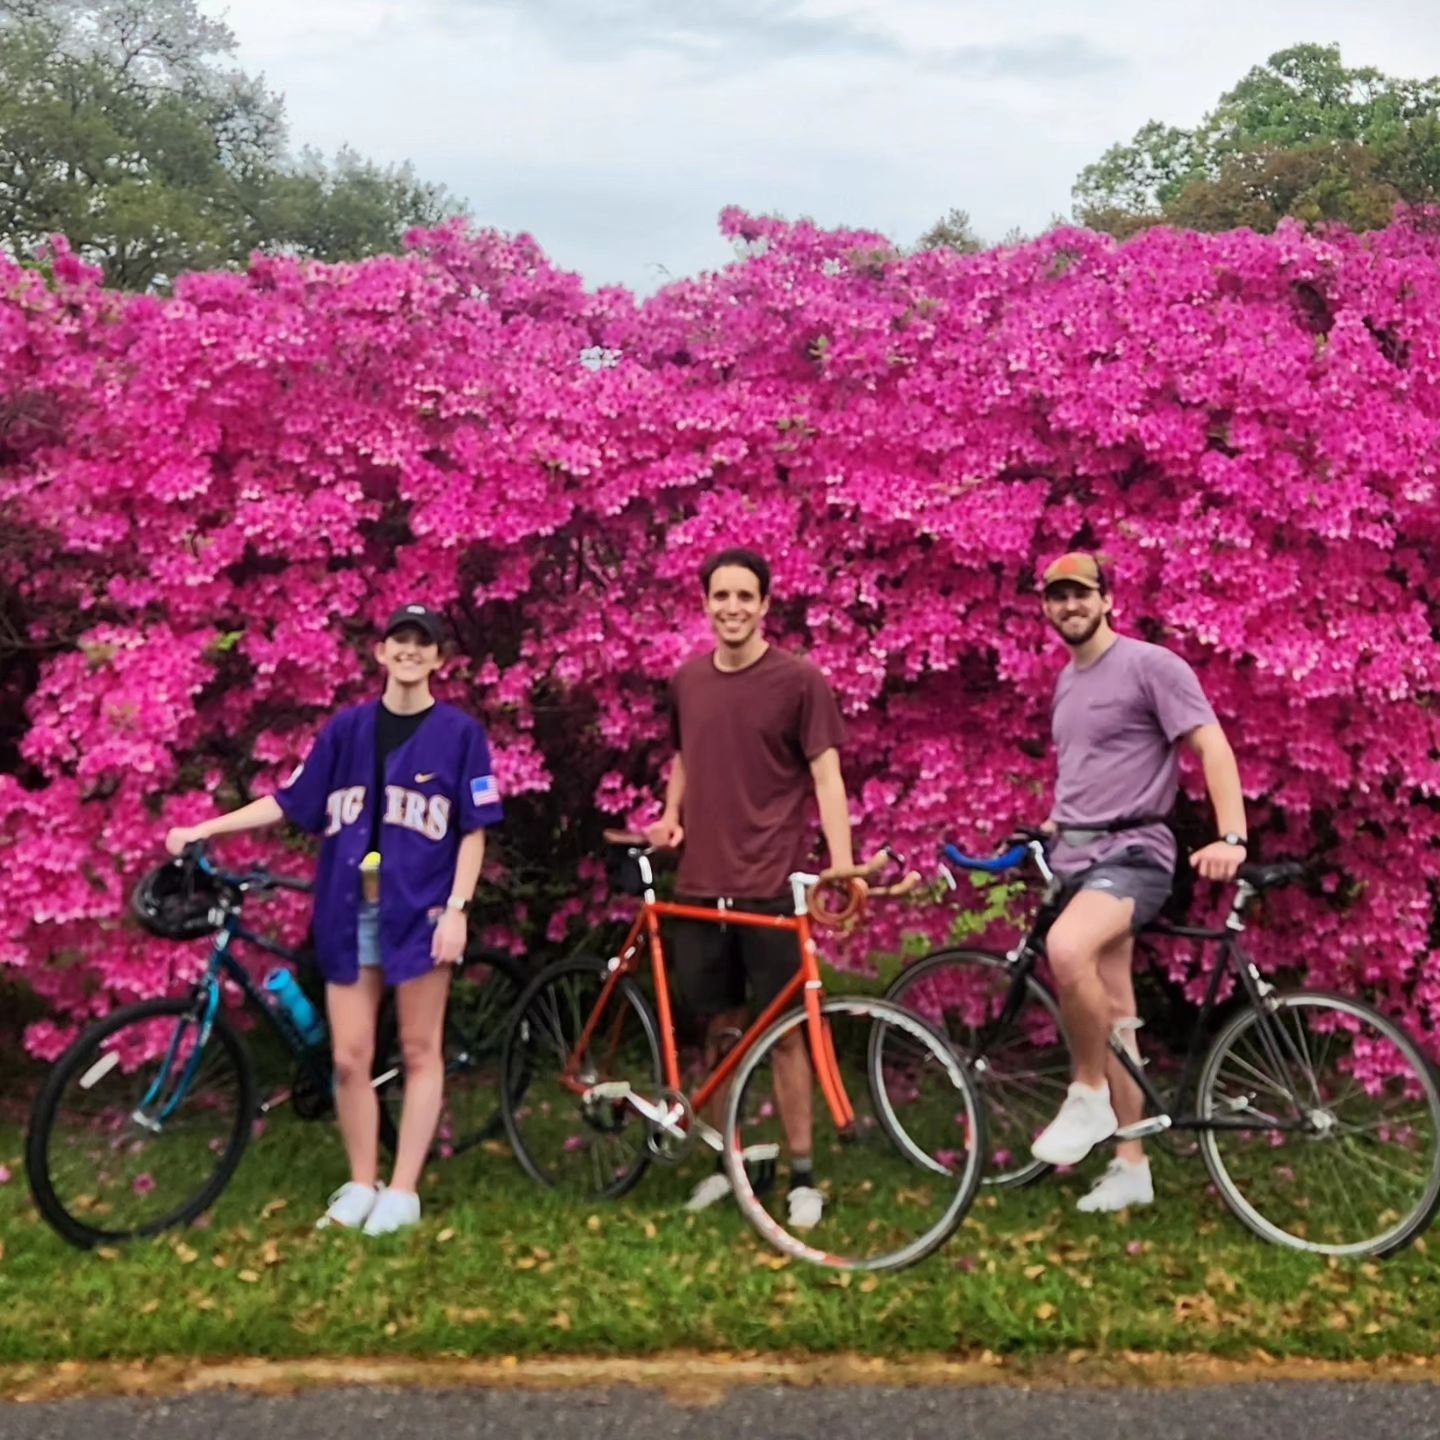 We rode the 🌸@azaleatrail🌸 and they did not disappoint! 

📸 @timothycazares @toutdesuitefilms

#adventure #cycling #bicycle #azaleas #azaleatrail #lafayette #lafayettela #bikelafayette #acadiana #acadianaadventureguides #experienceacadiana #Acadia